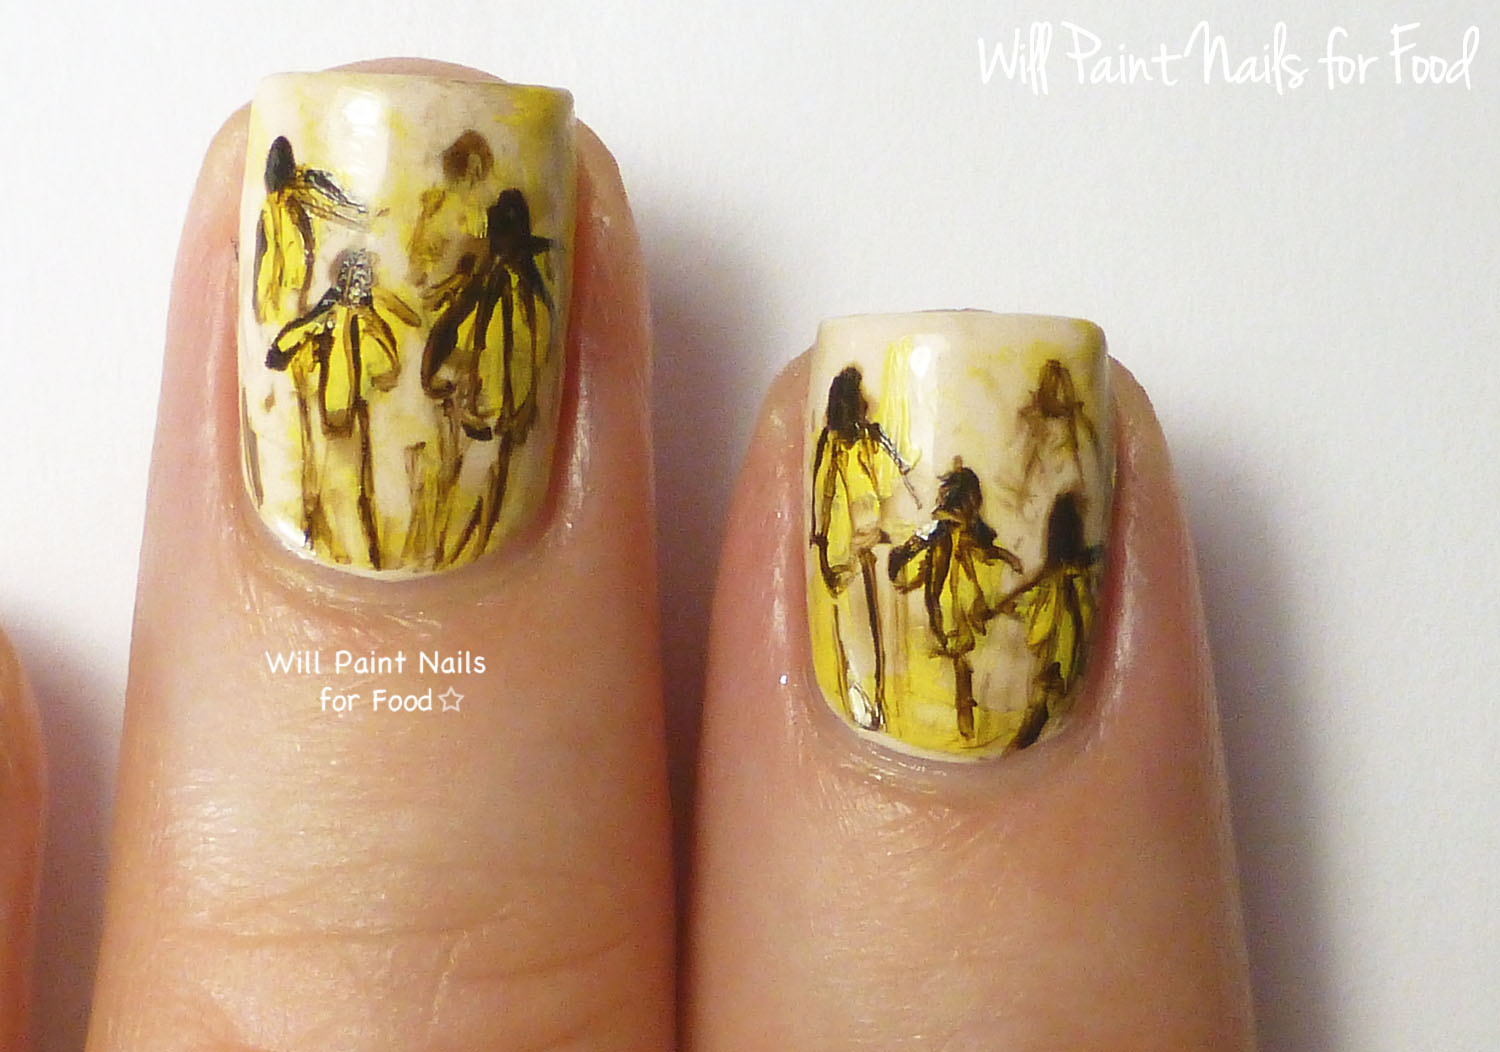 Cone flowers freehand nail art (detail)